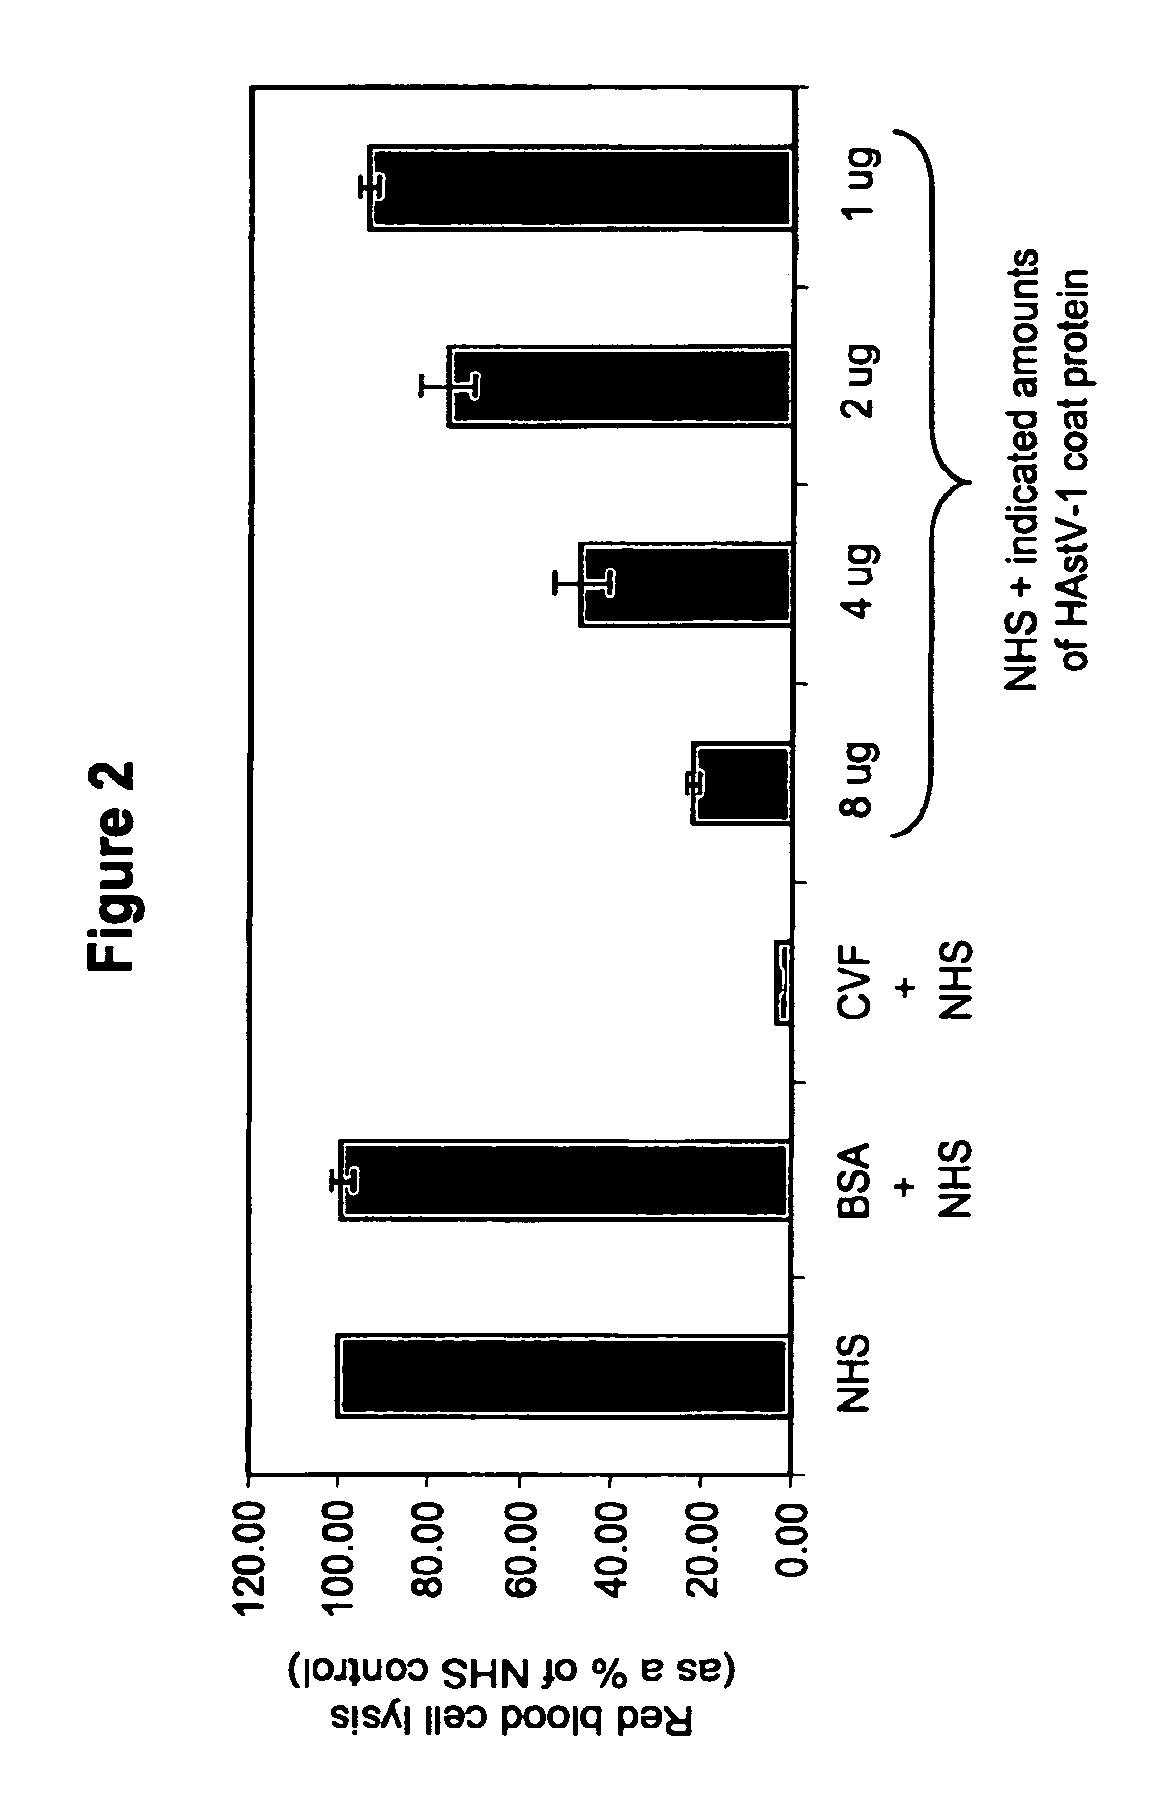 Methods for regulating complement cascade proteins using astrovirus coat protein and derivatives thereof